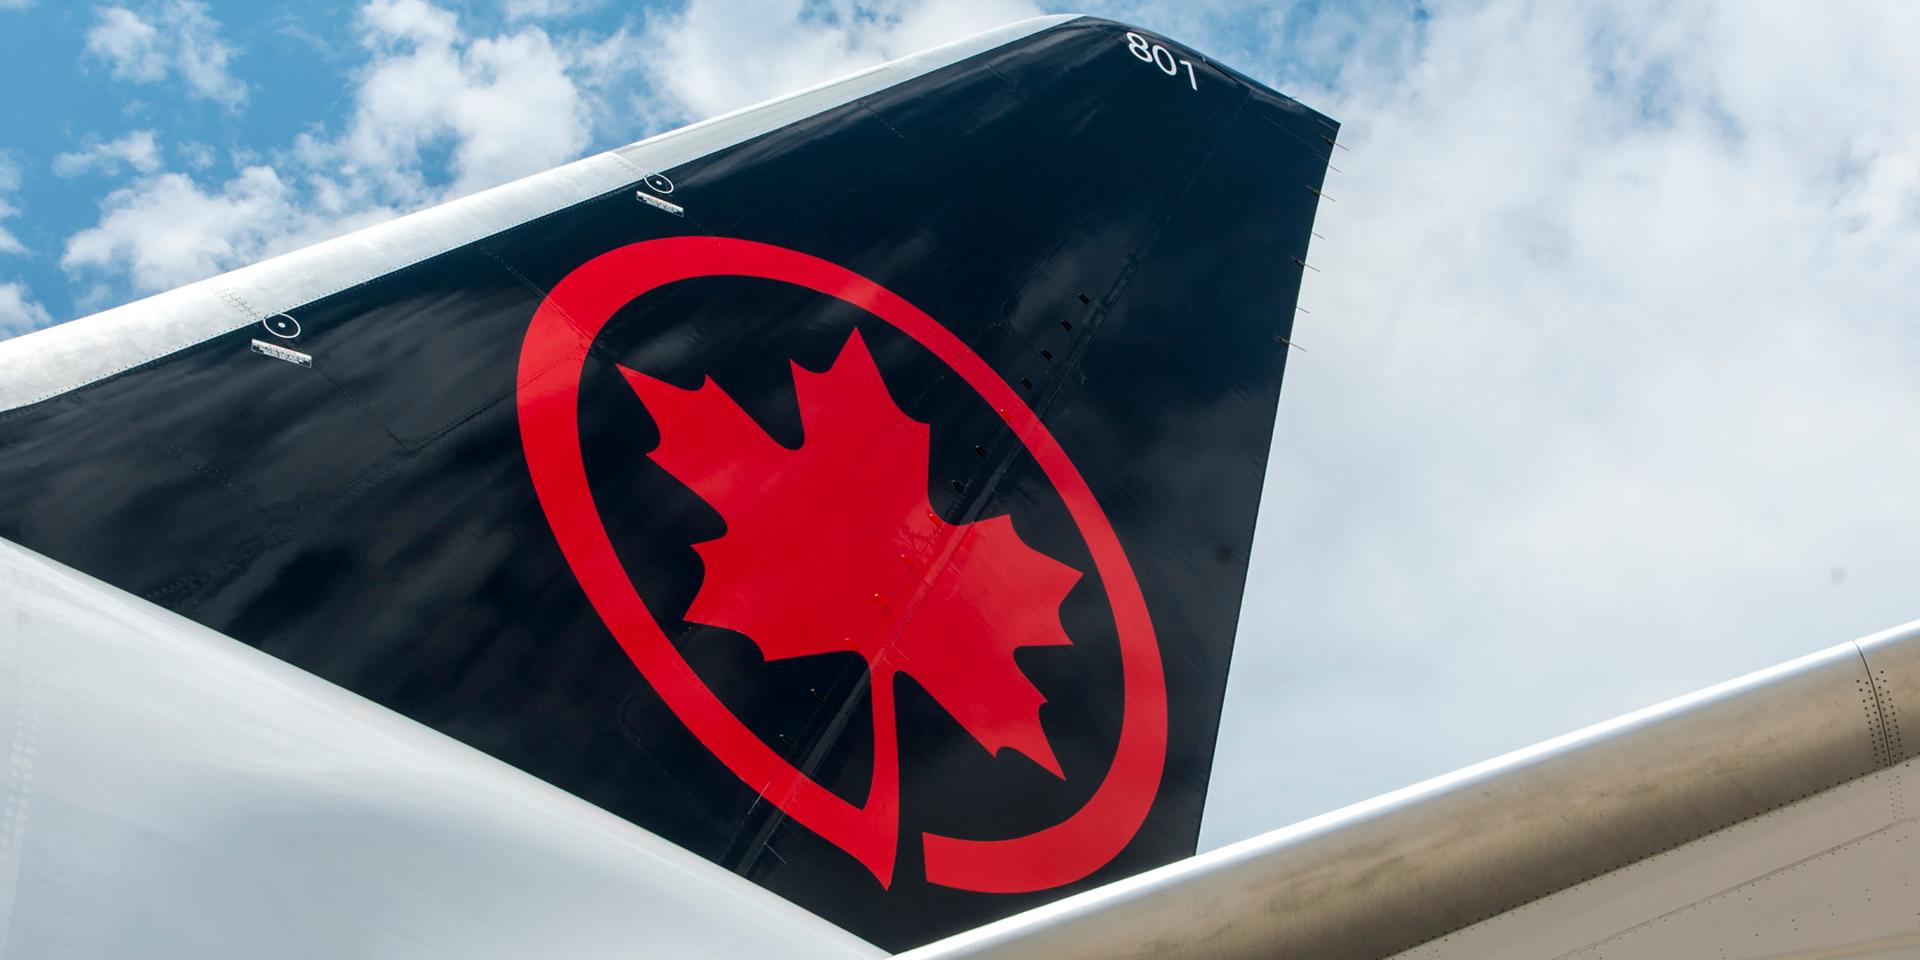 Air Canada tail image